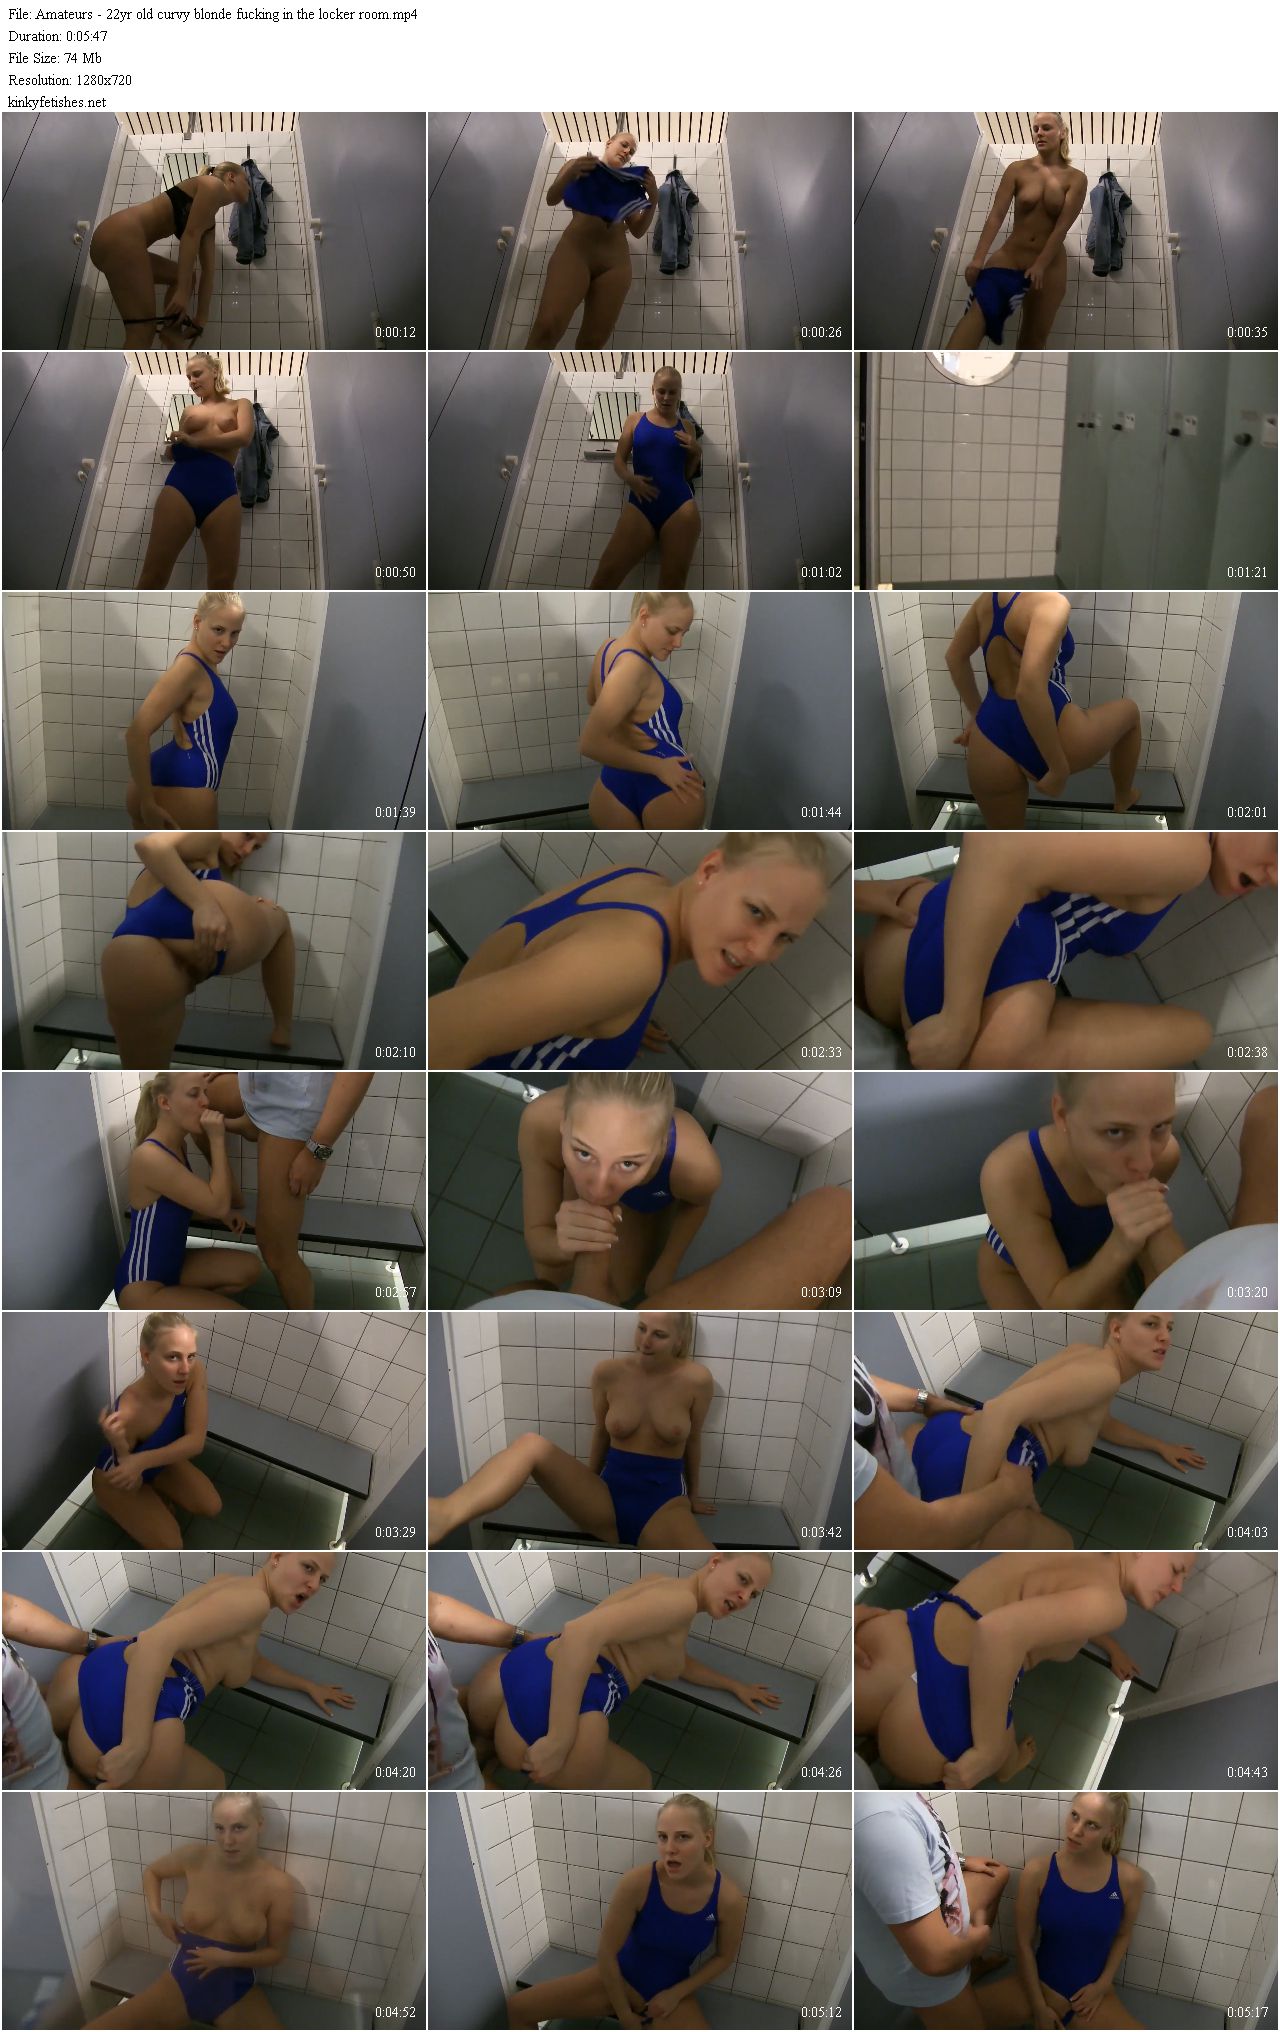 Amateurs  22yr old curvy blonde fucking in the locker room (2018/MyWhiteTeens/HD)